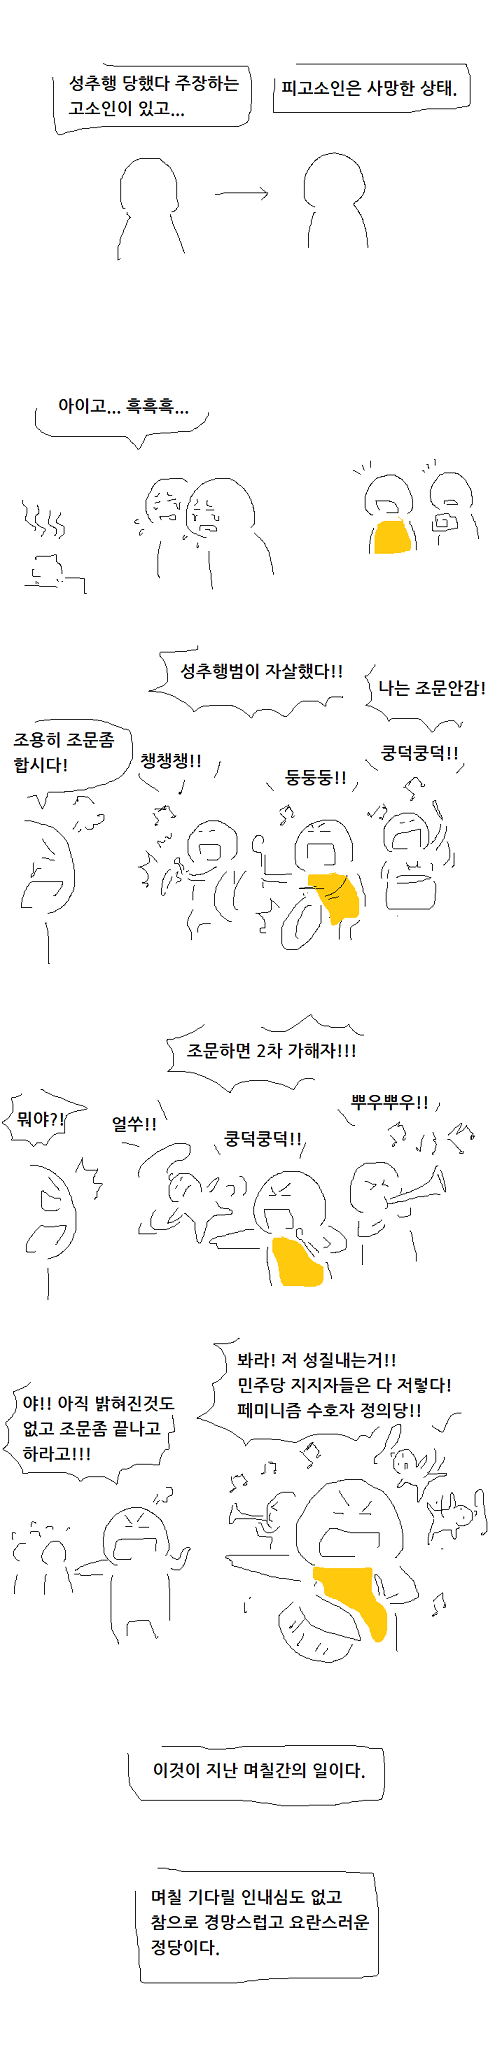 mon_0714_난리법석.png